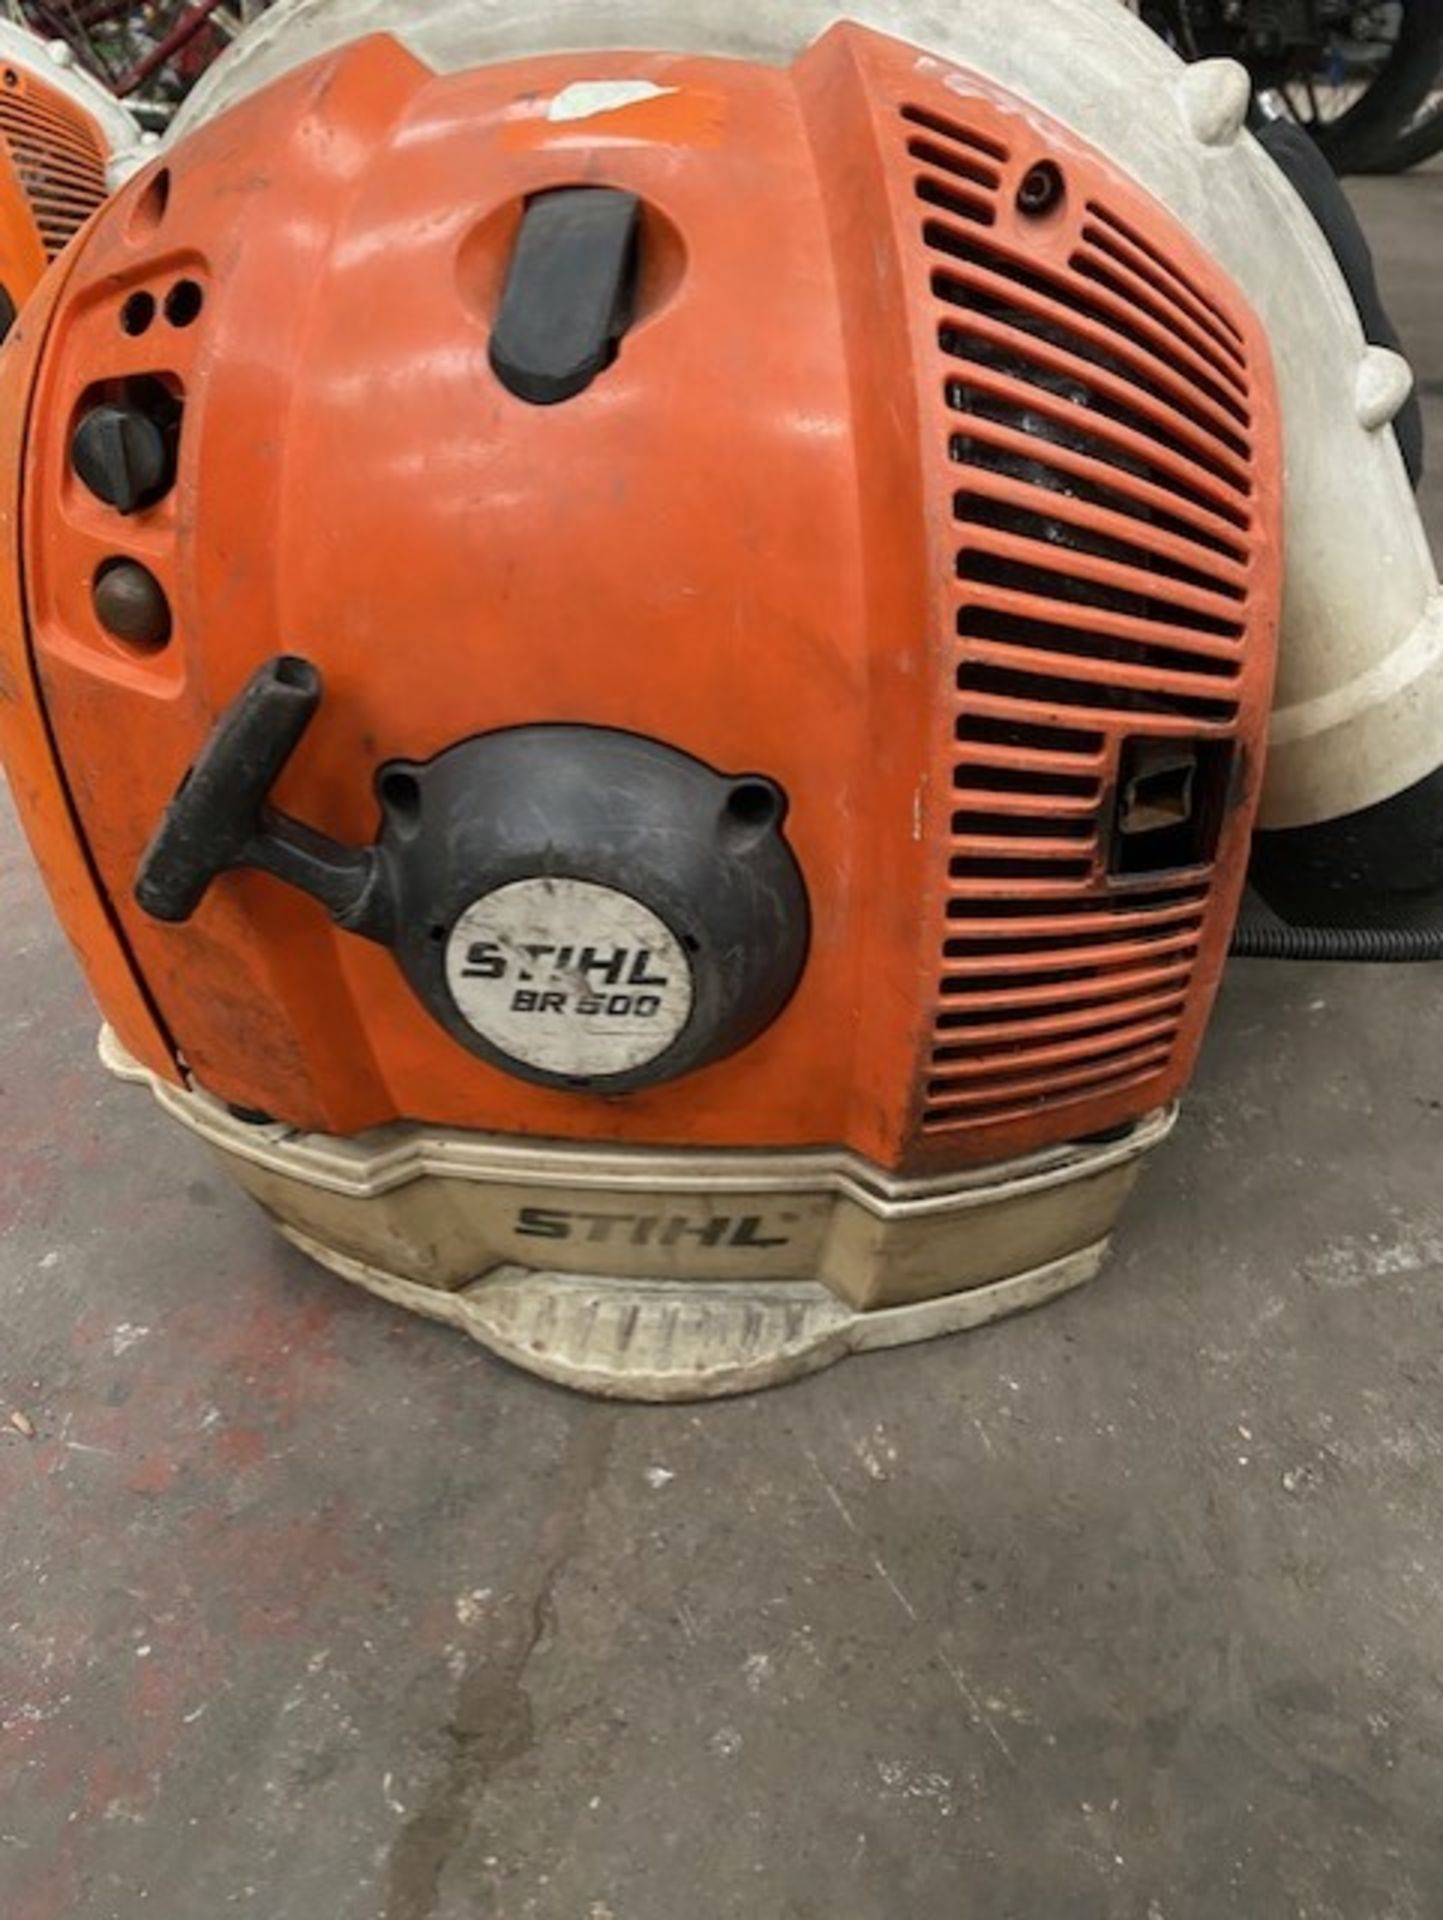 Stihl BR600 Backpack Blower - Image 2 of 4